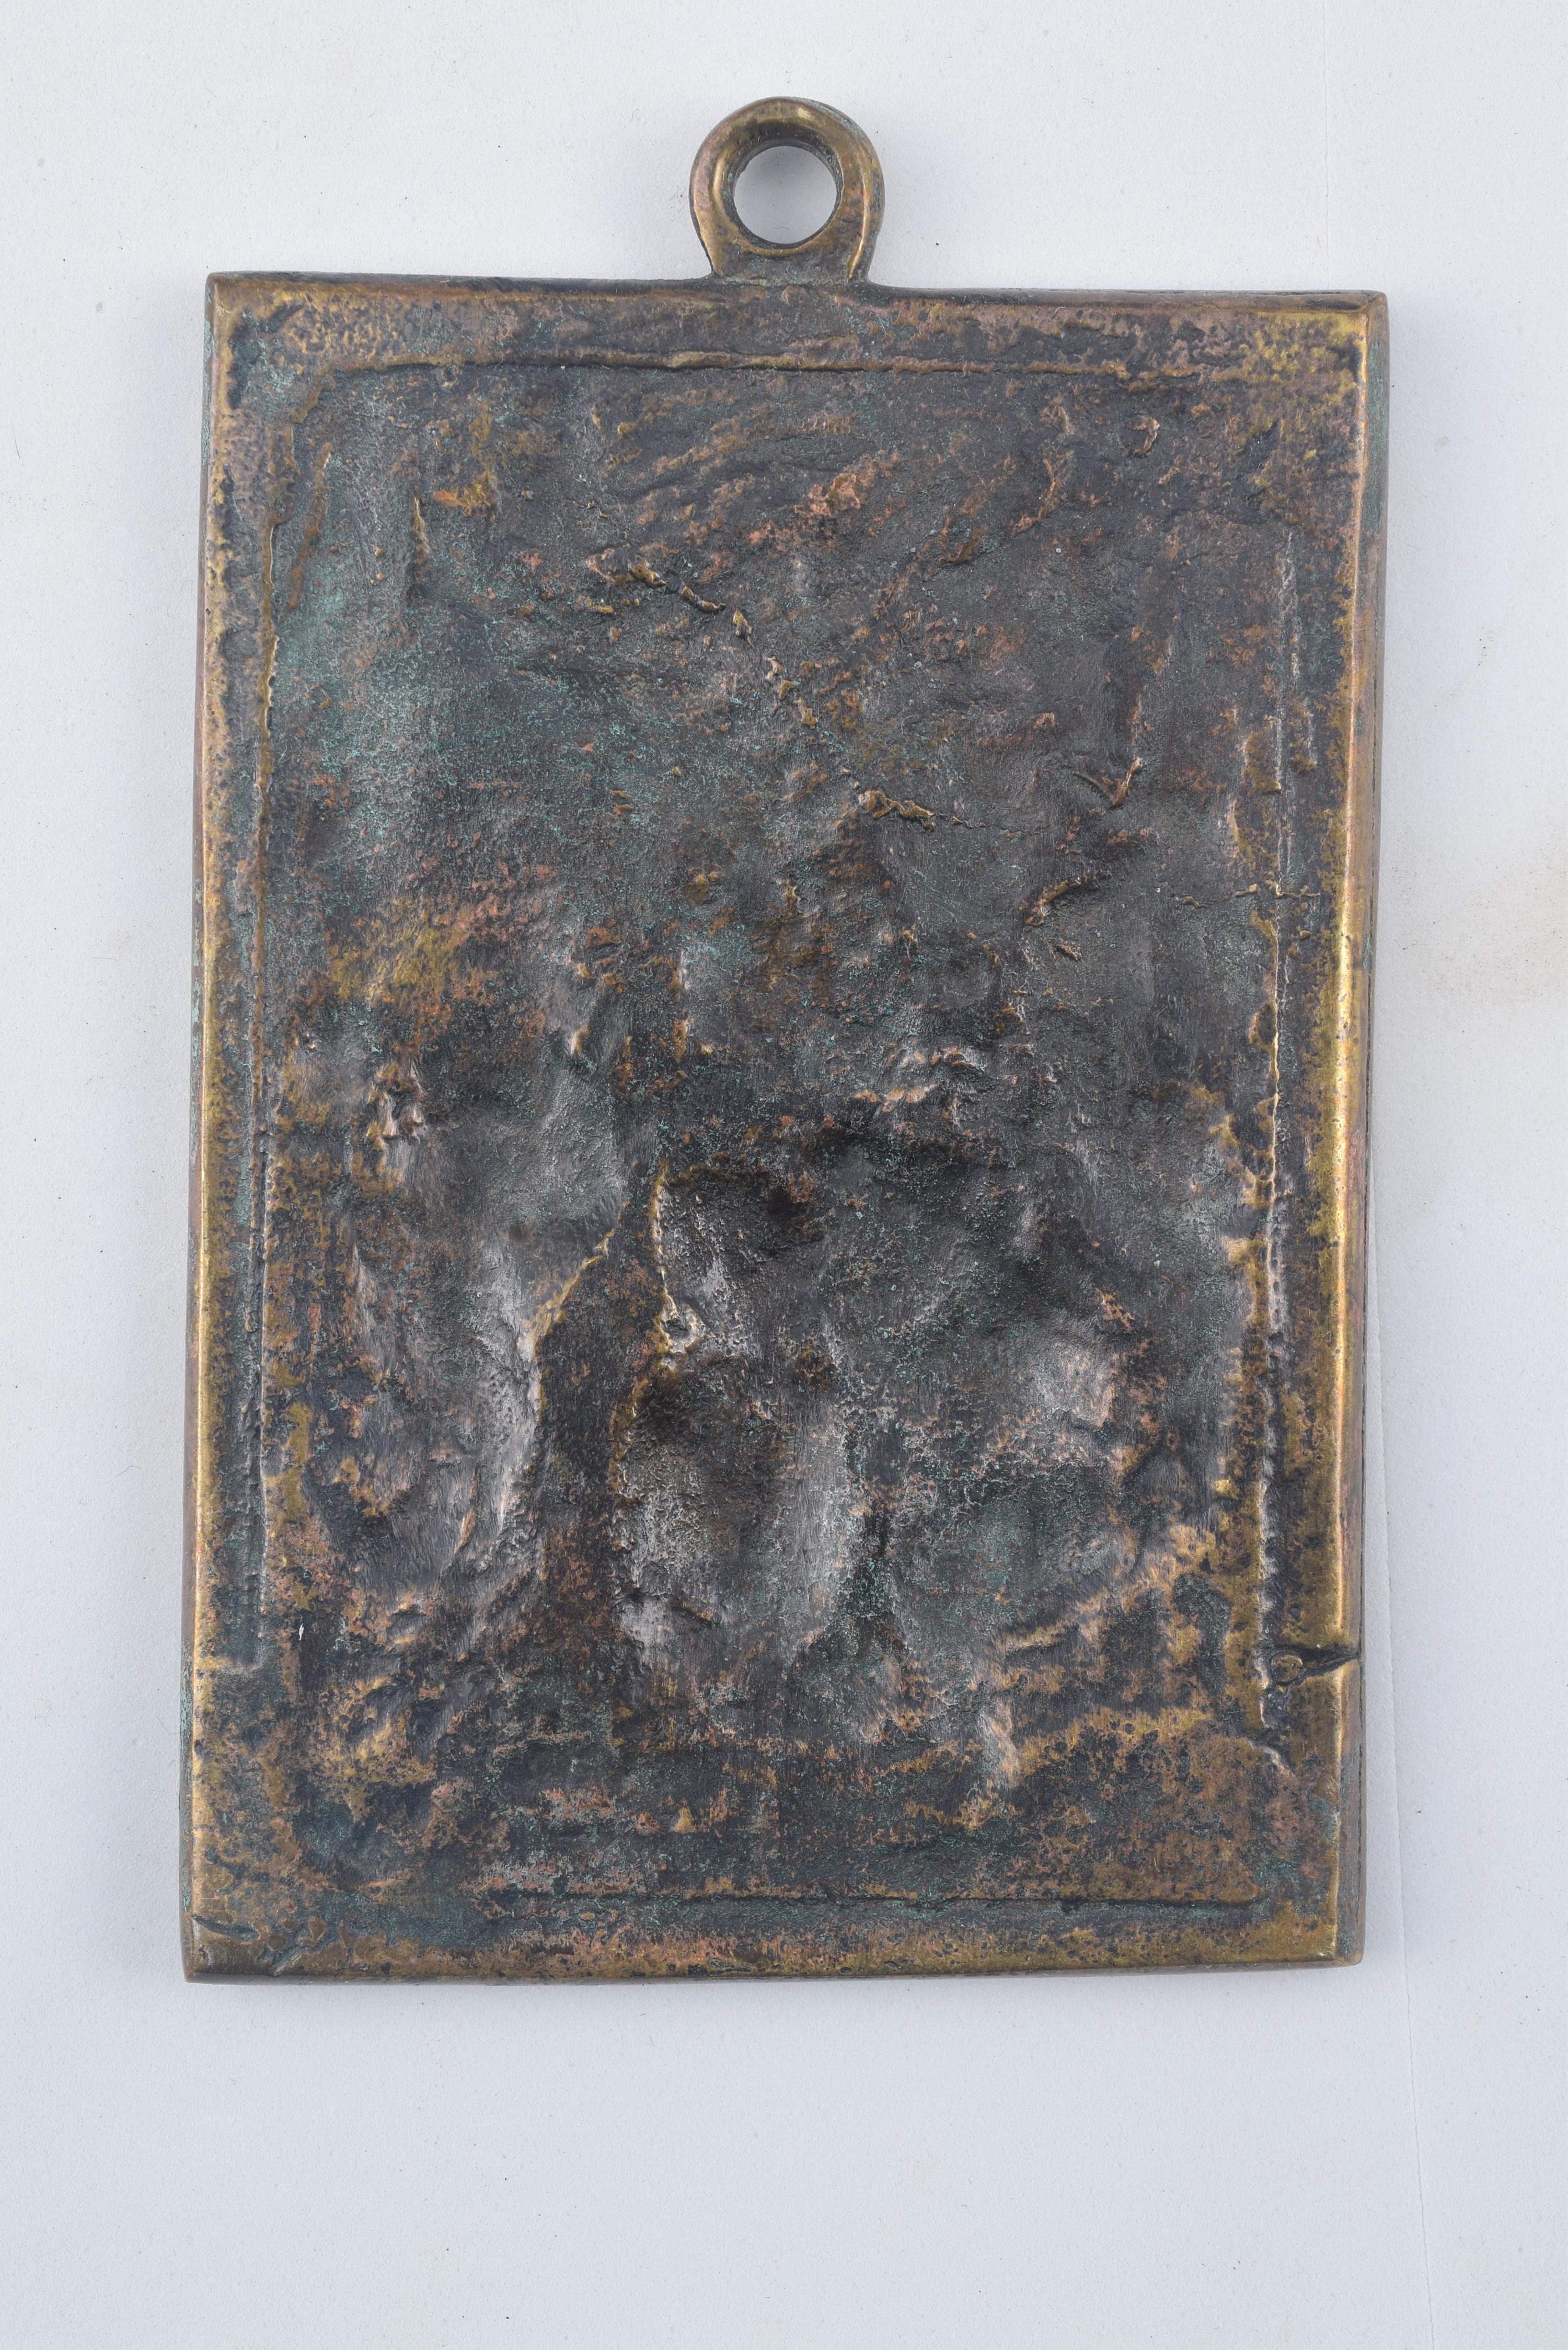 Devotional plaque, Adoration of the Three Wise Men. Bronze. Spanish school, 17th century.
 Rectangular devotional plaque made of bronze, which presents the scene of the Birth of Jesus in relief. The Virgin Mary has the Child standing on her knees in